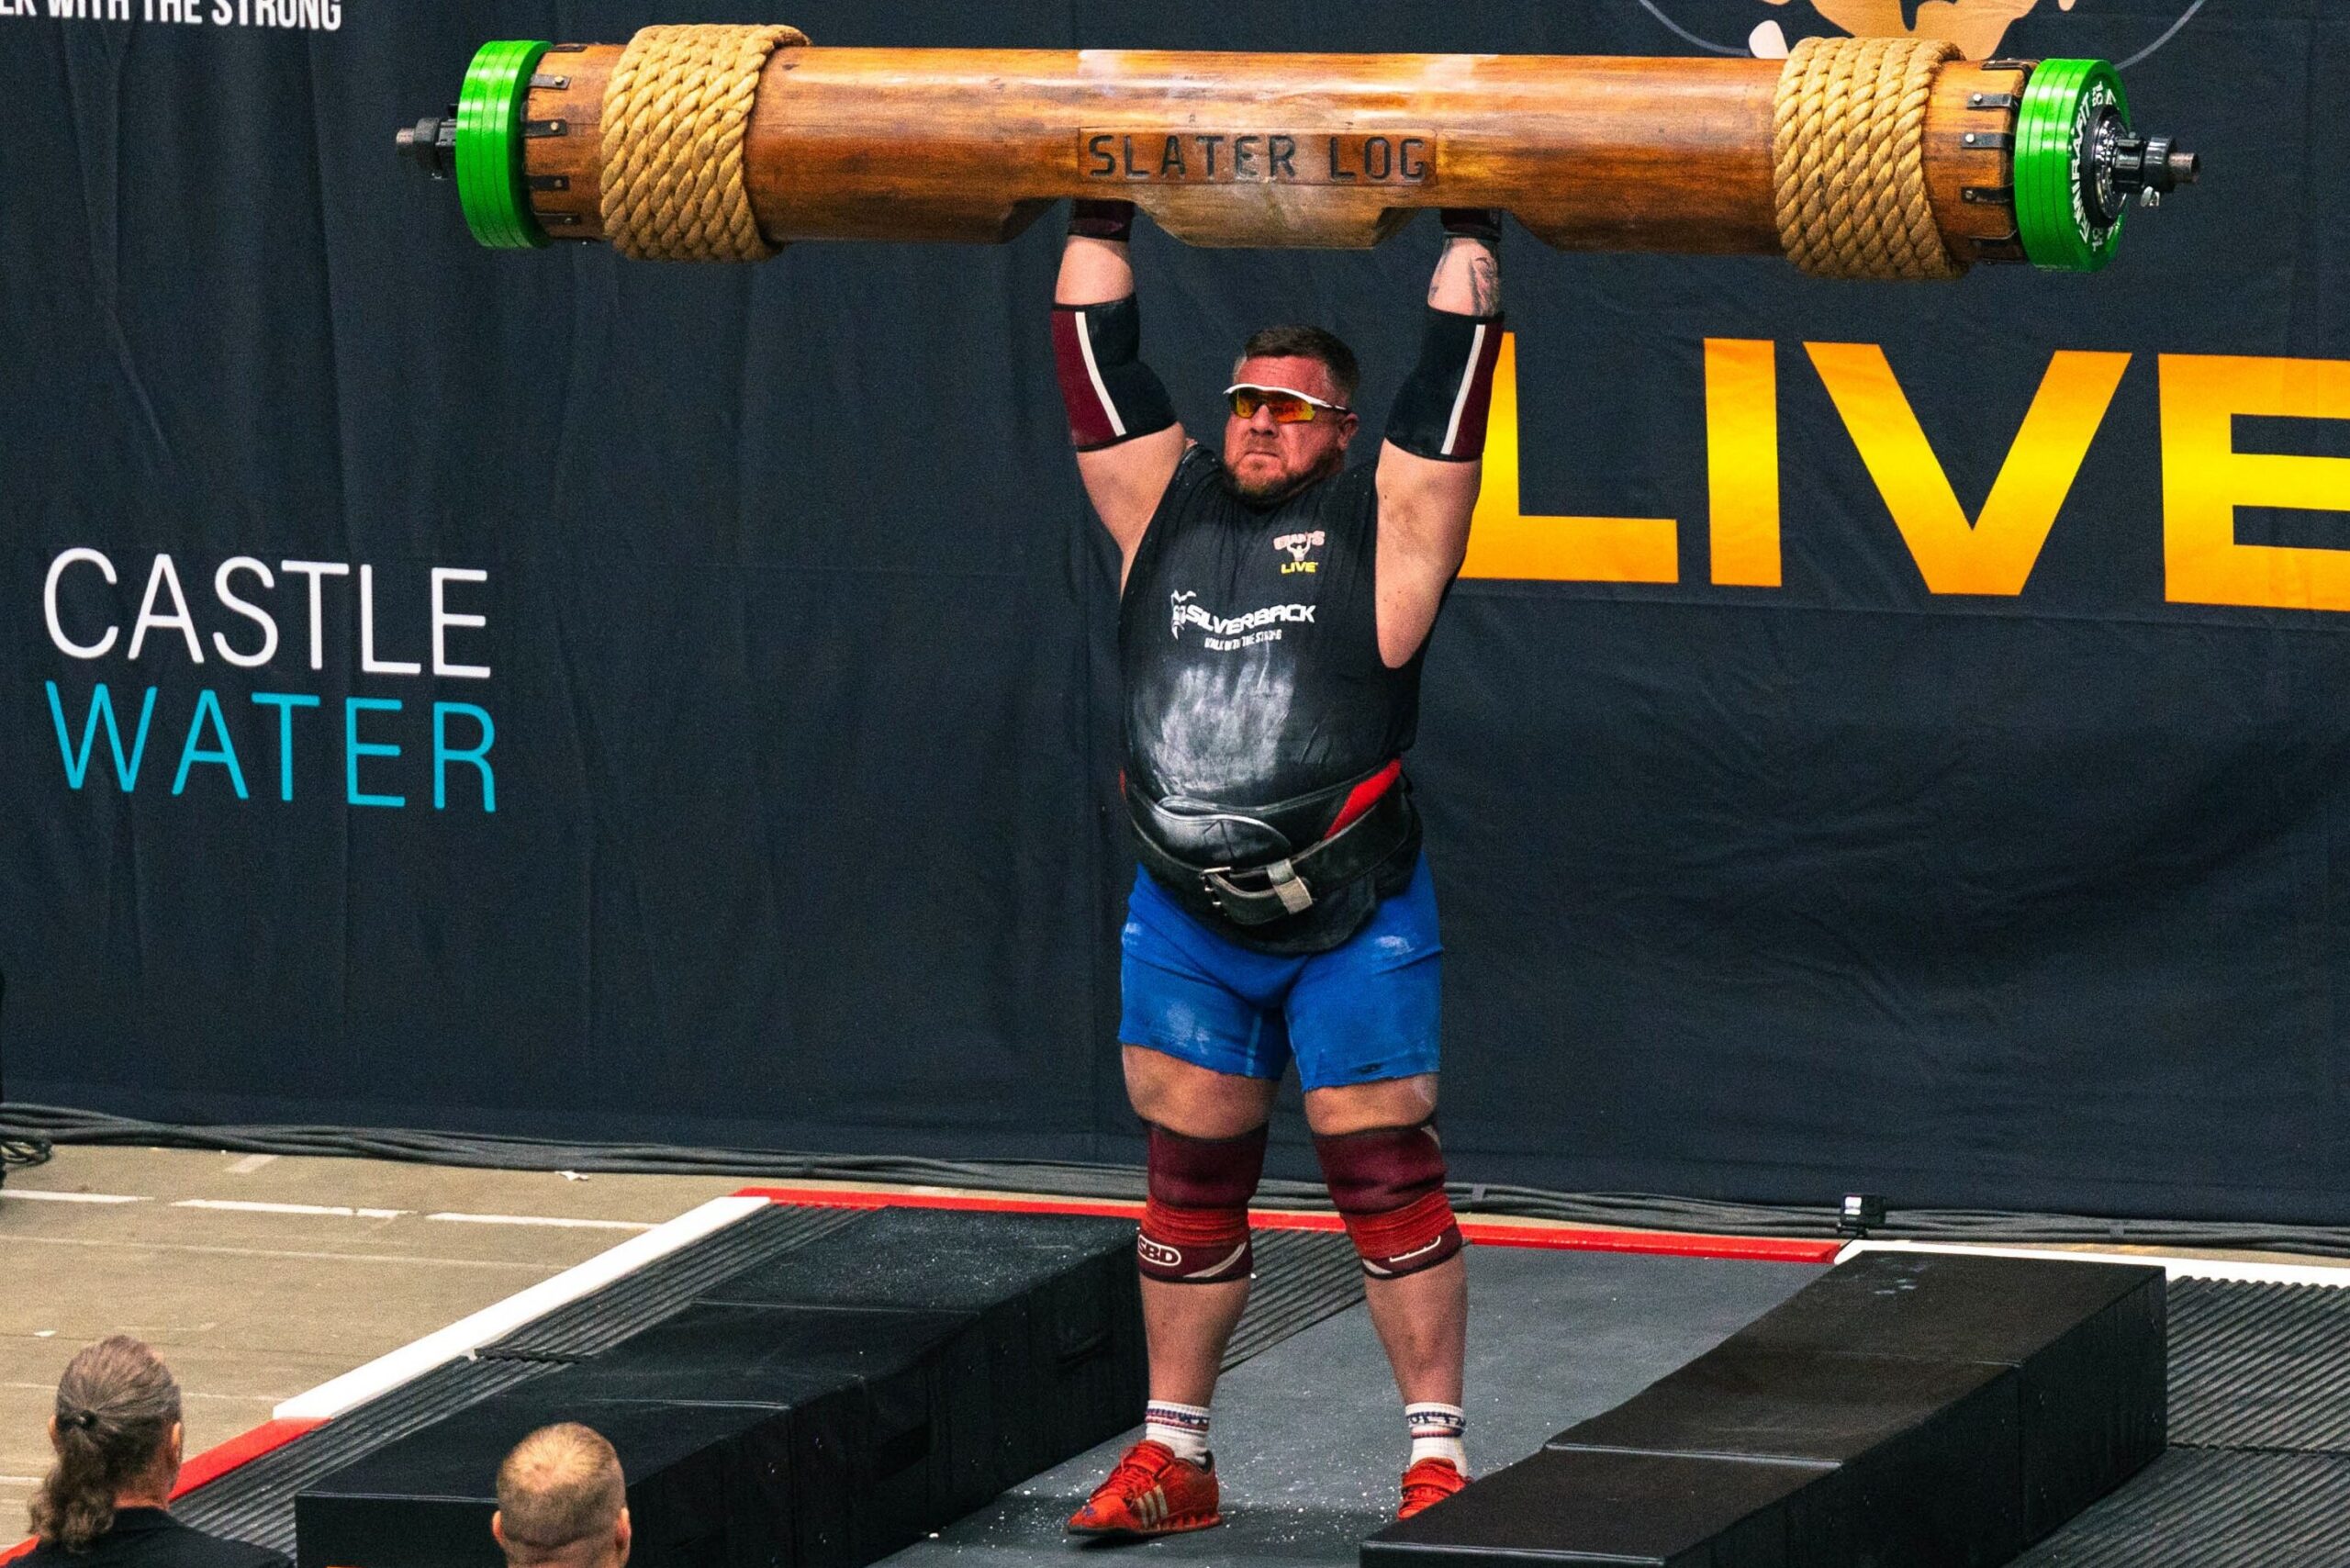 strongman doing a log press with a log barbell